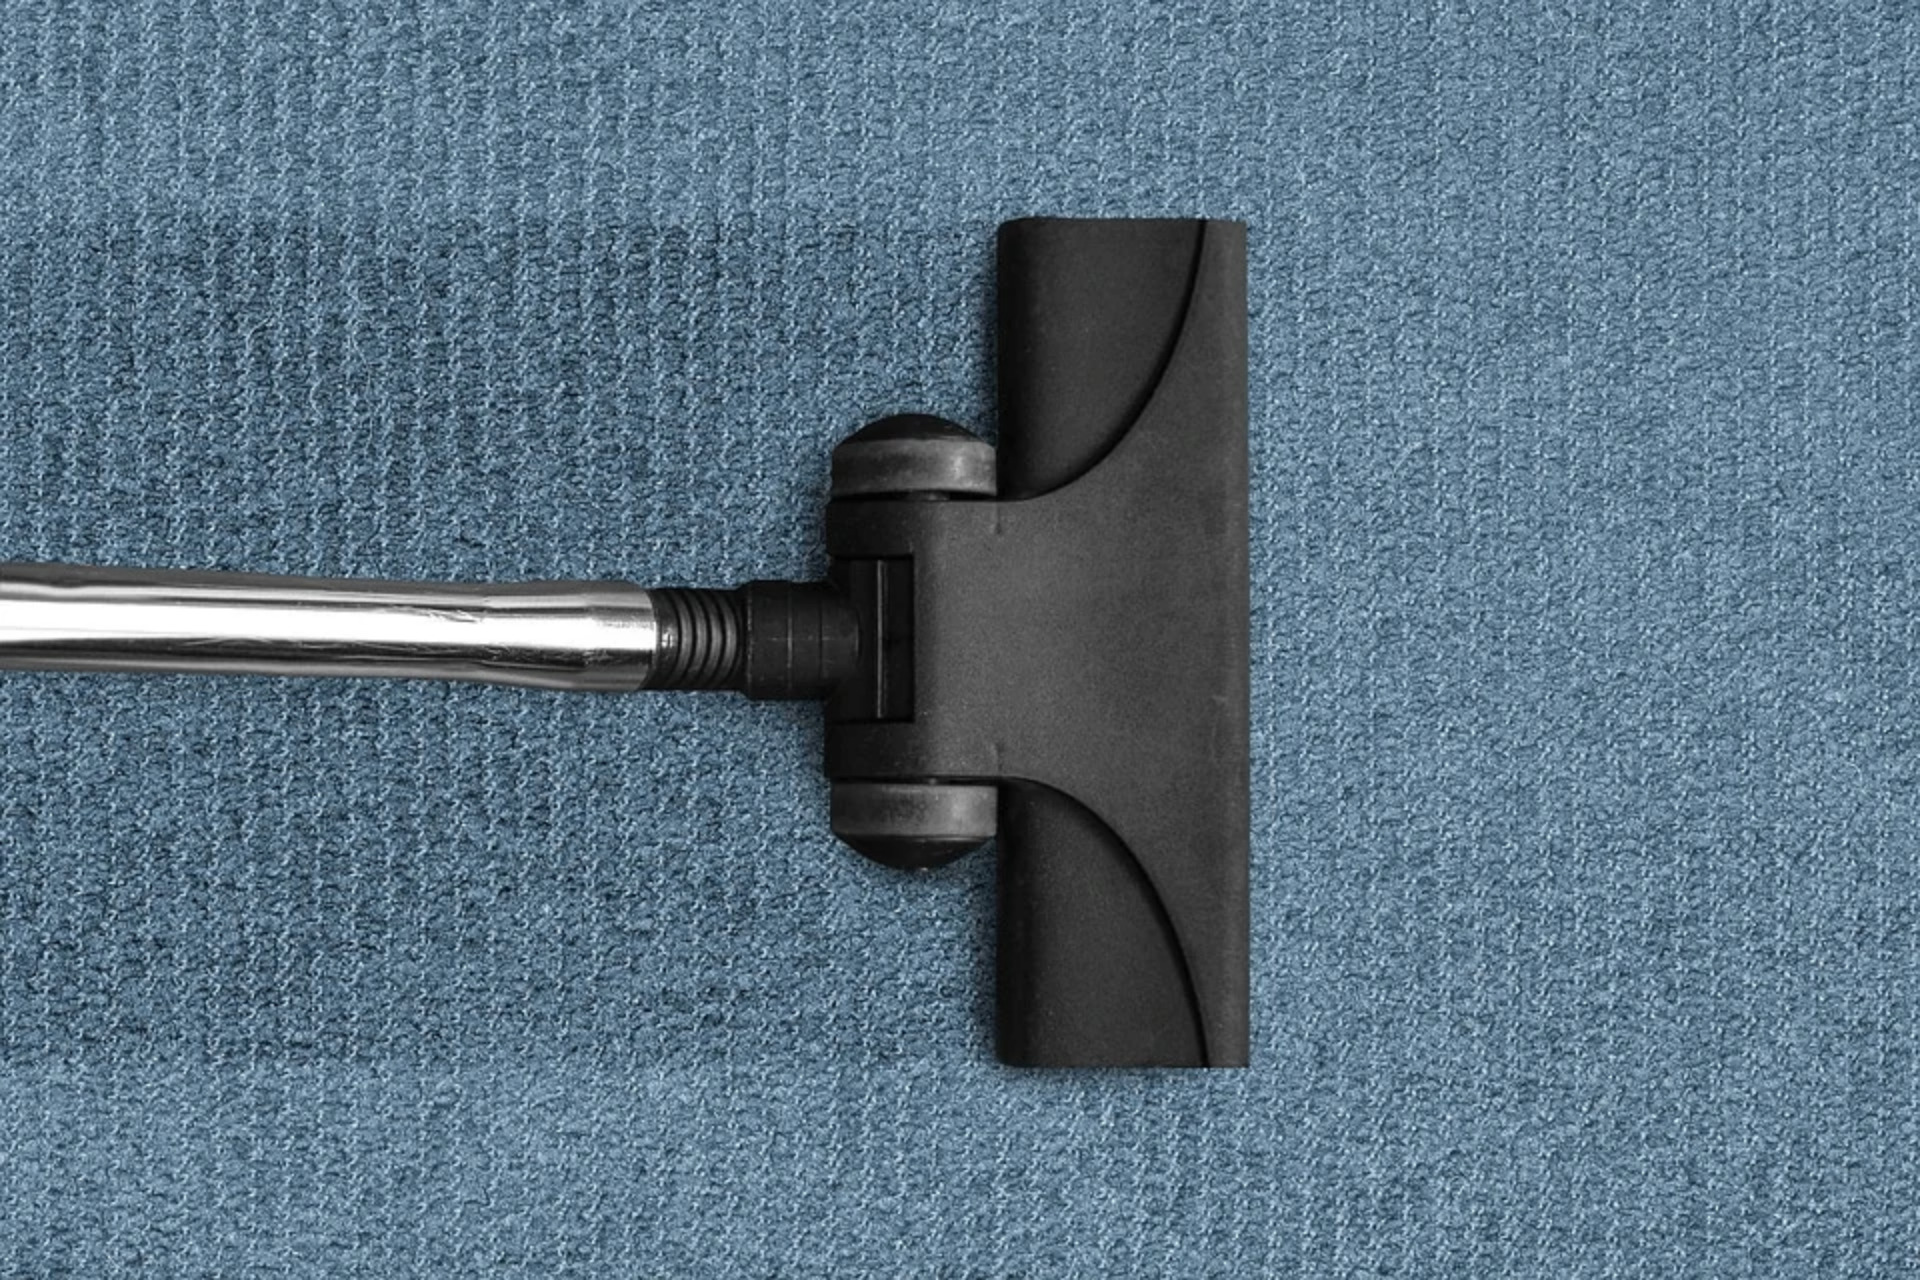 The Importance of Carpet Cleaning for Water Damage Restoration